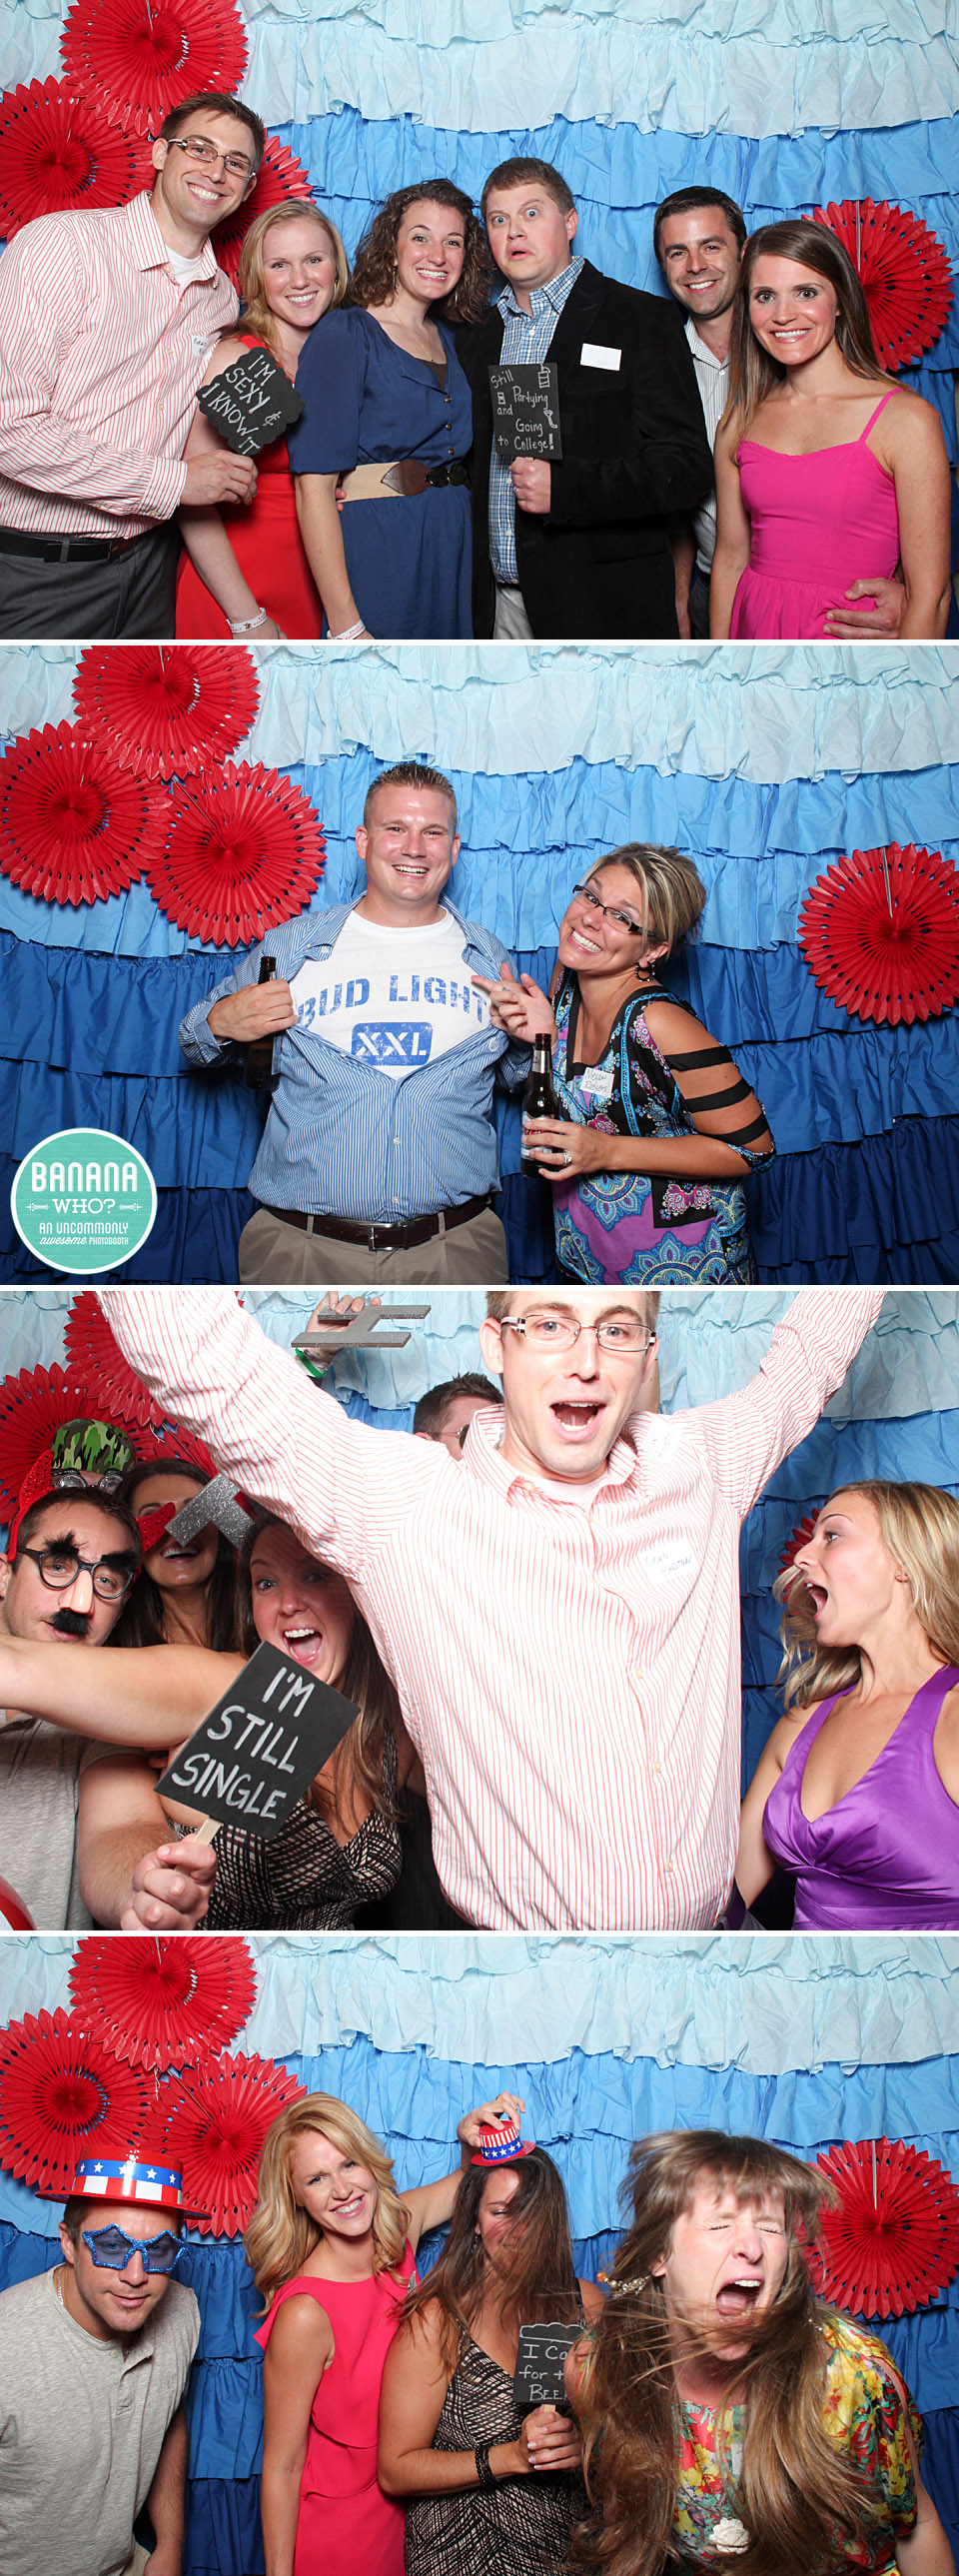 2003 class reunion, Hilton Independence, Ruffle backdrops, Best photo booths, American